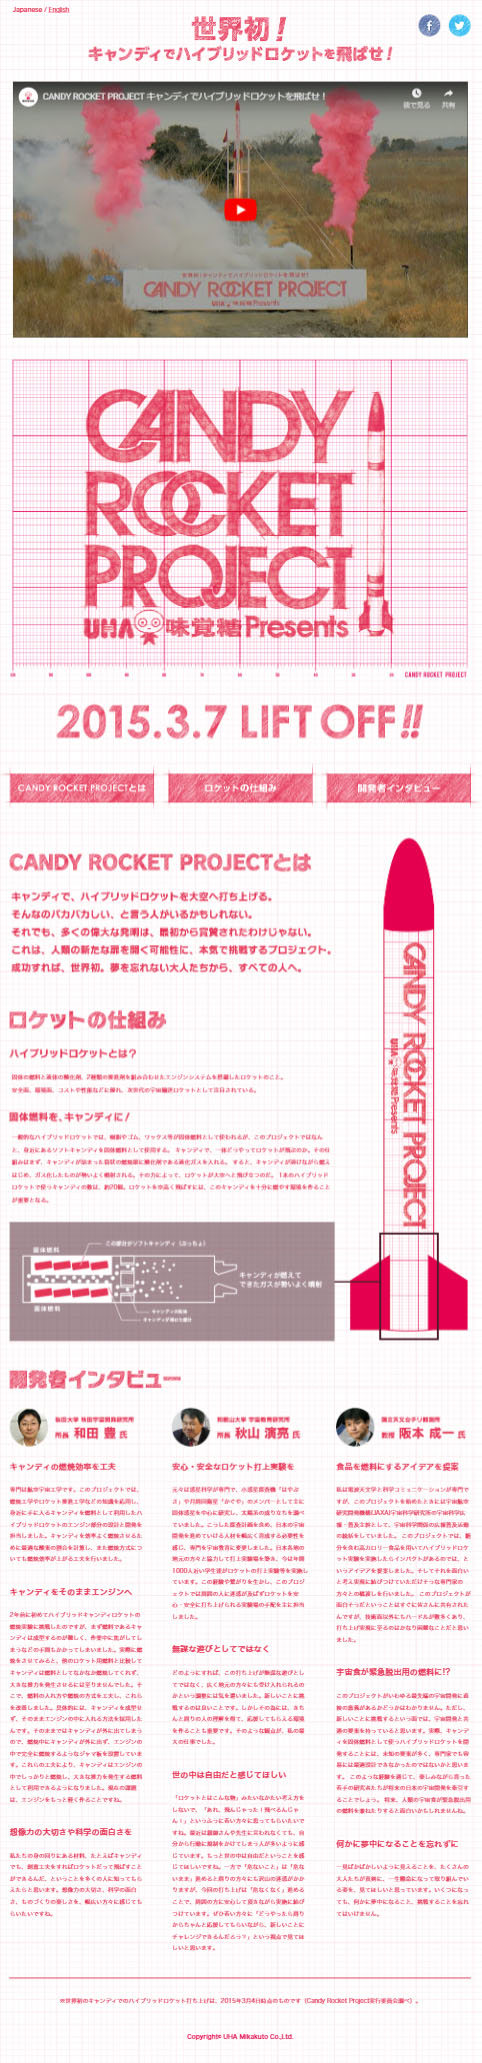 CANDY ROCKET PROJECT_sp_1